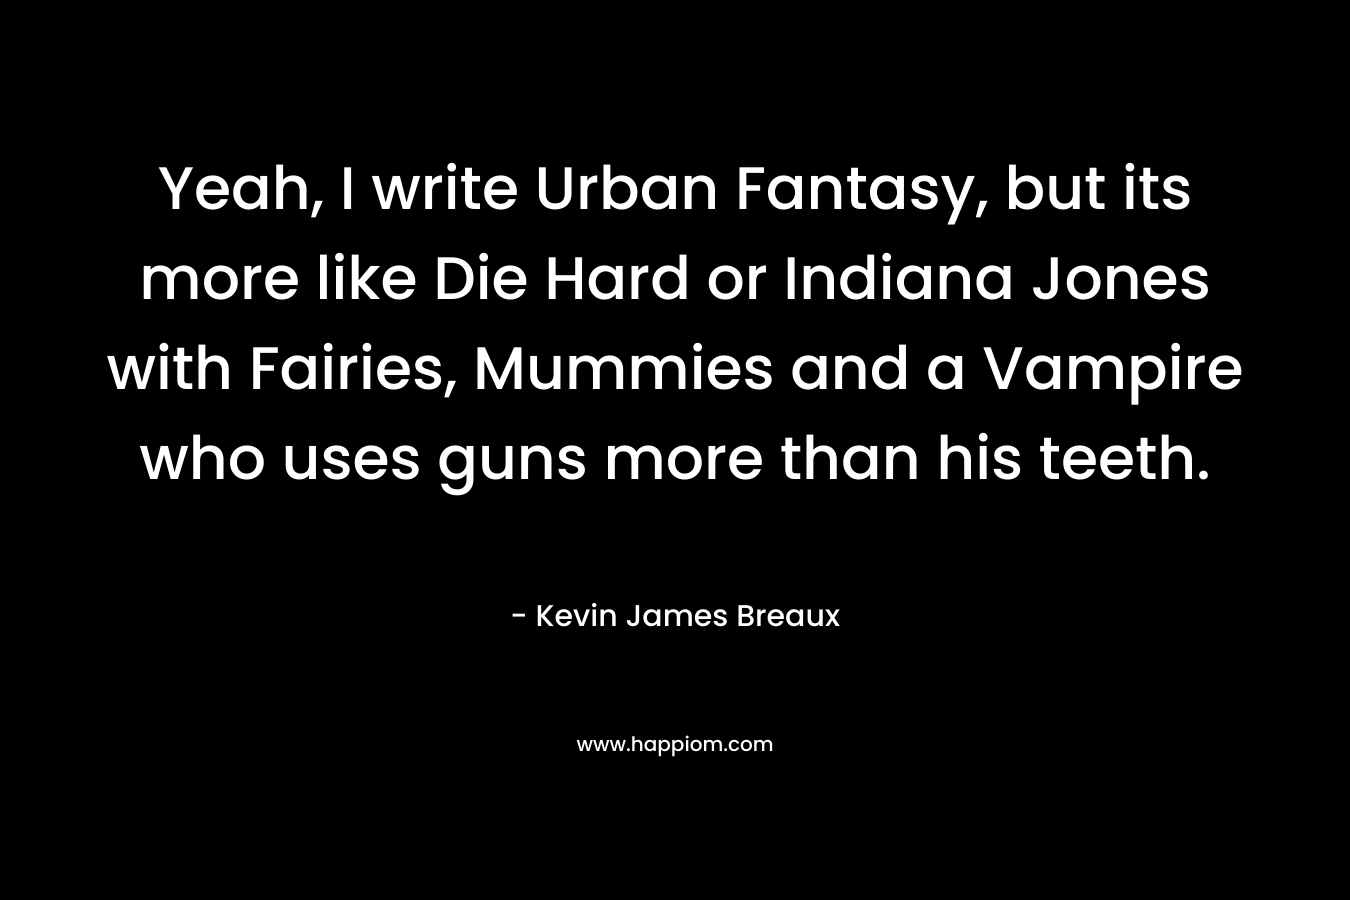 Yeah, I write Urban Fantasy, but its more like Die Hard or Indiana Jones with Fairies, Mummies and a Vampire who uses guns more than his teeth.